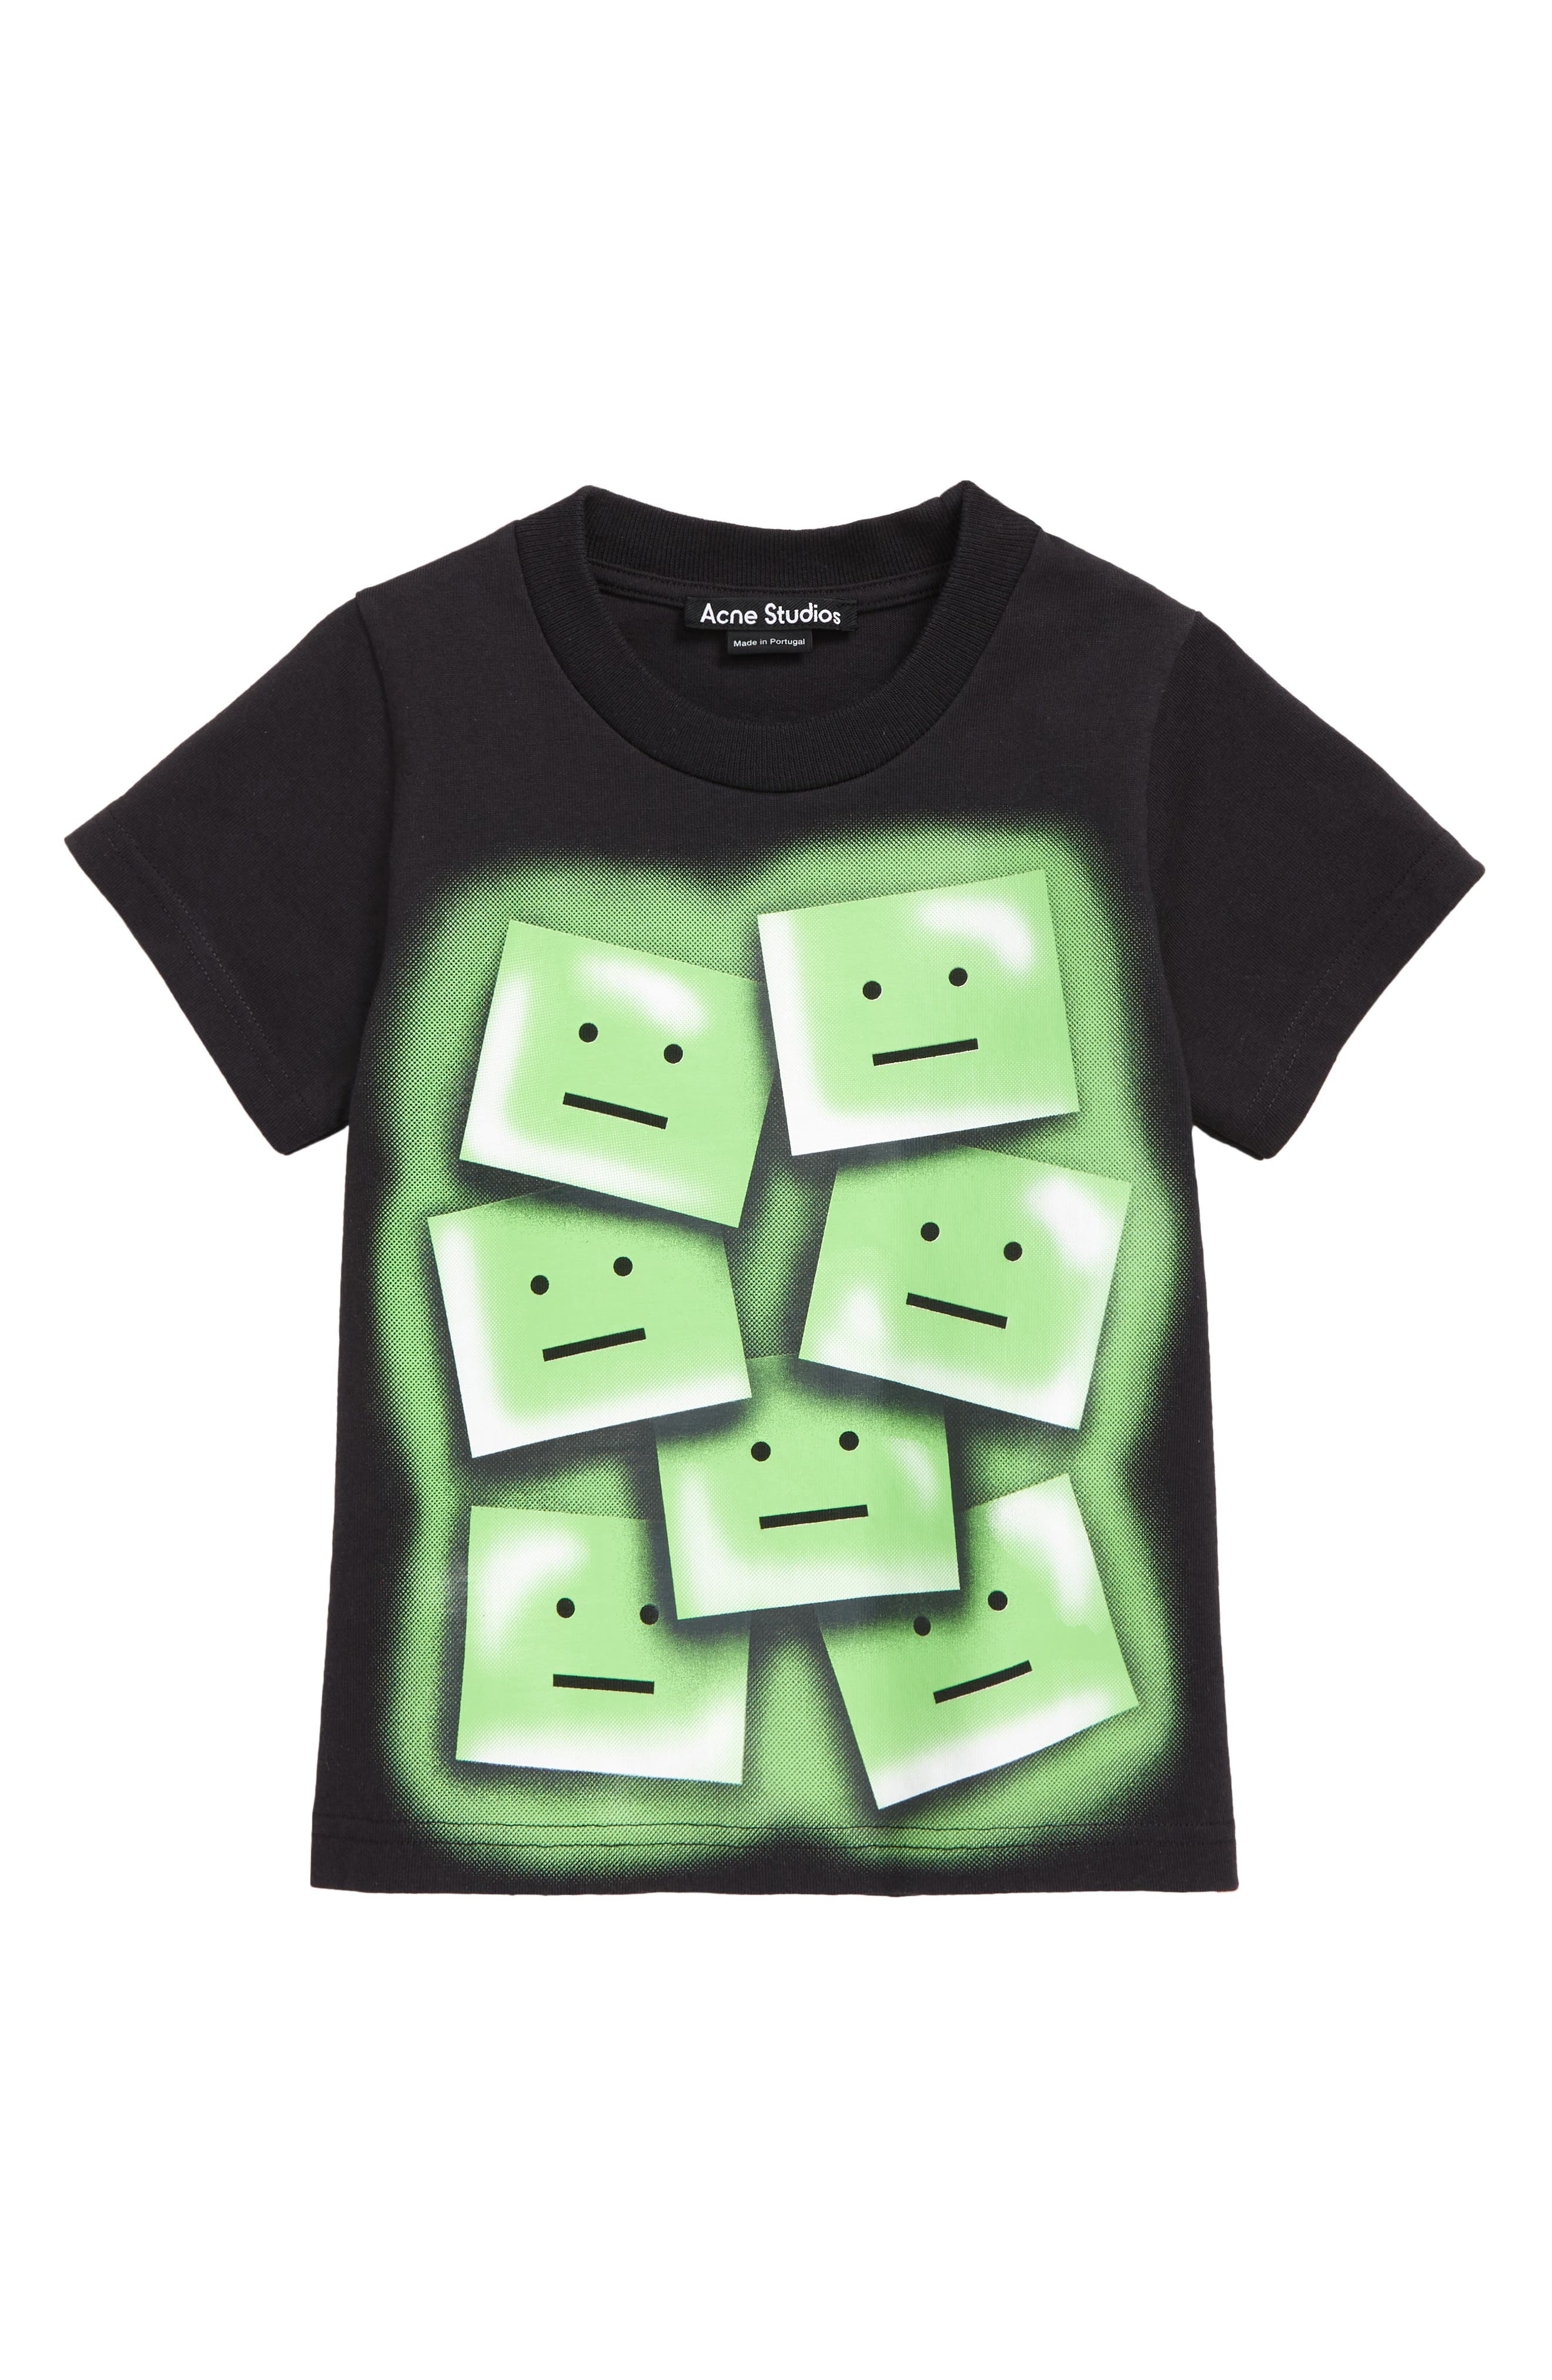 Acne Studios Kids' Mini Nash Face Graphic Tee in Black/Green at Nordstrom, Size 3-4Y Us